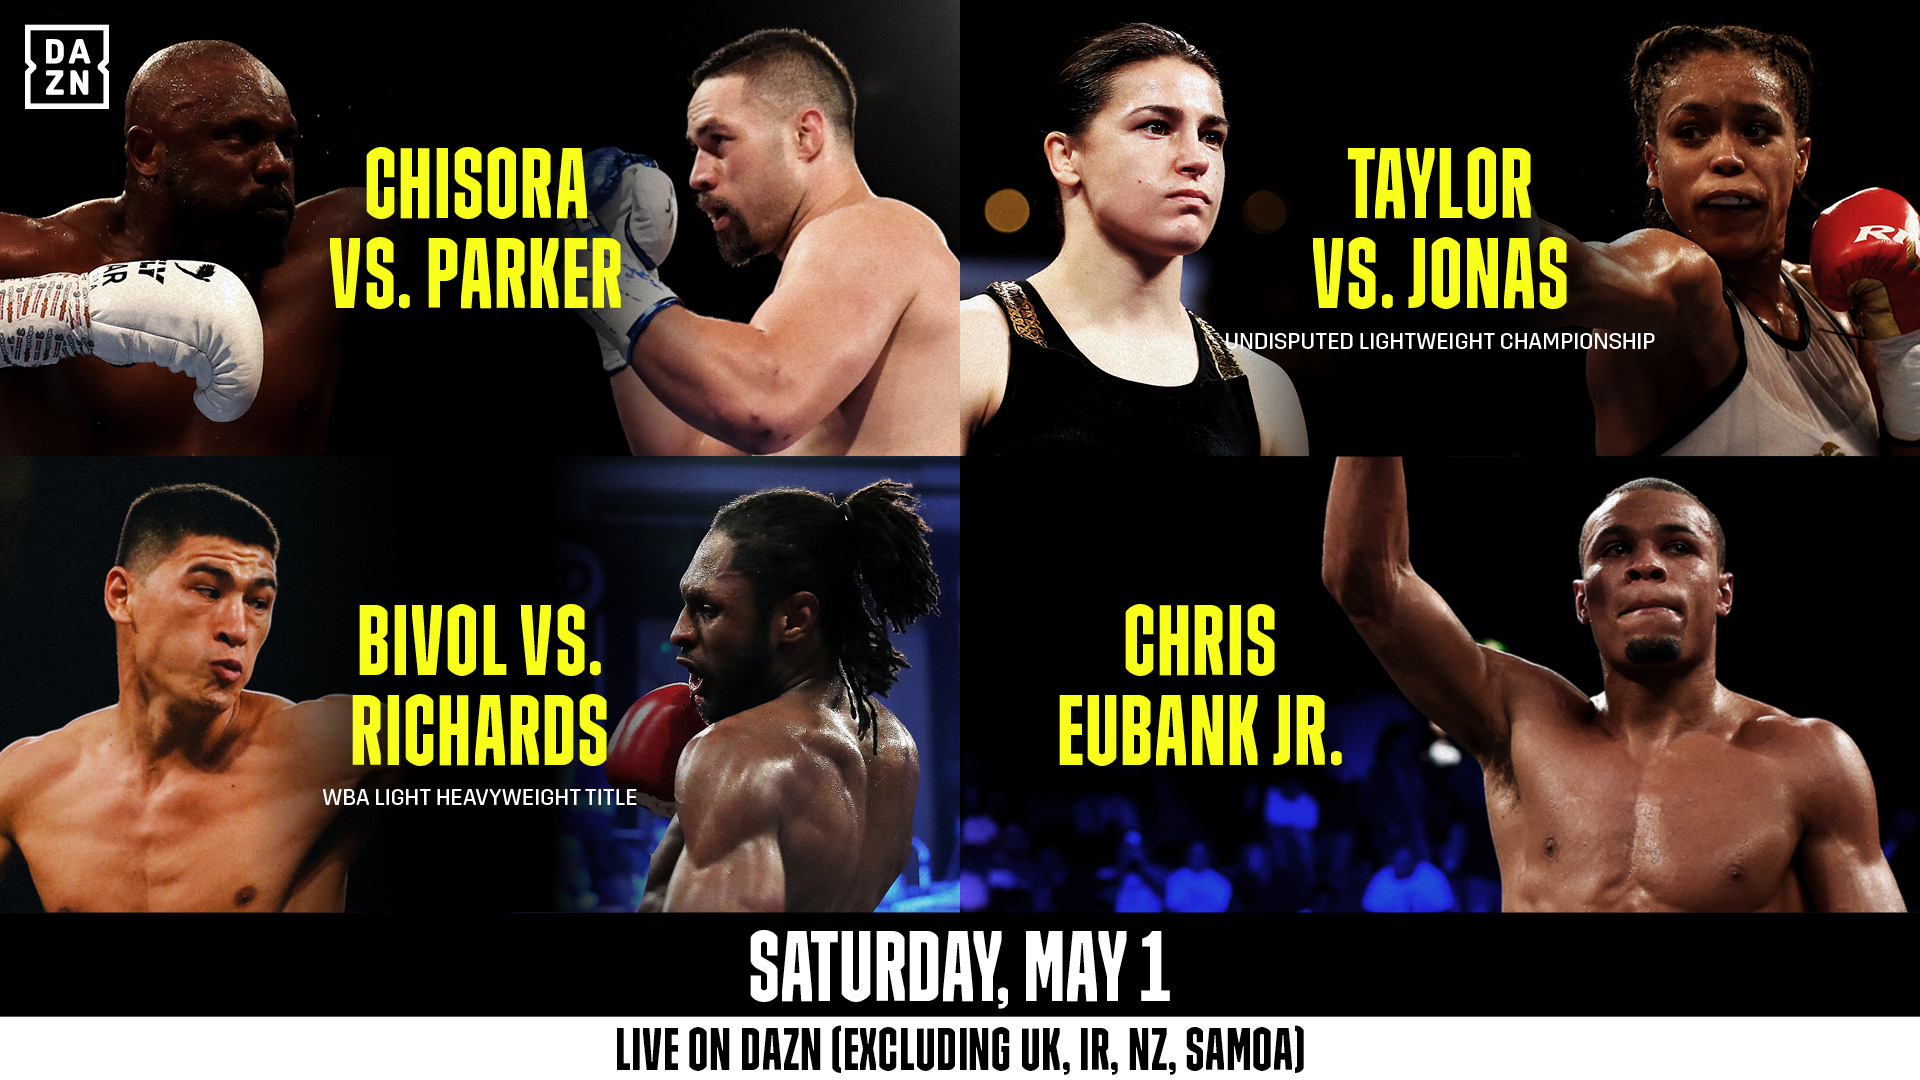 IT'S TIME! UFC returns to San Antonio with exciting matchups this weekend